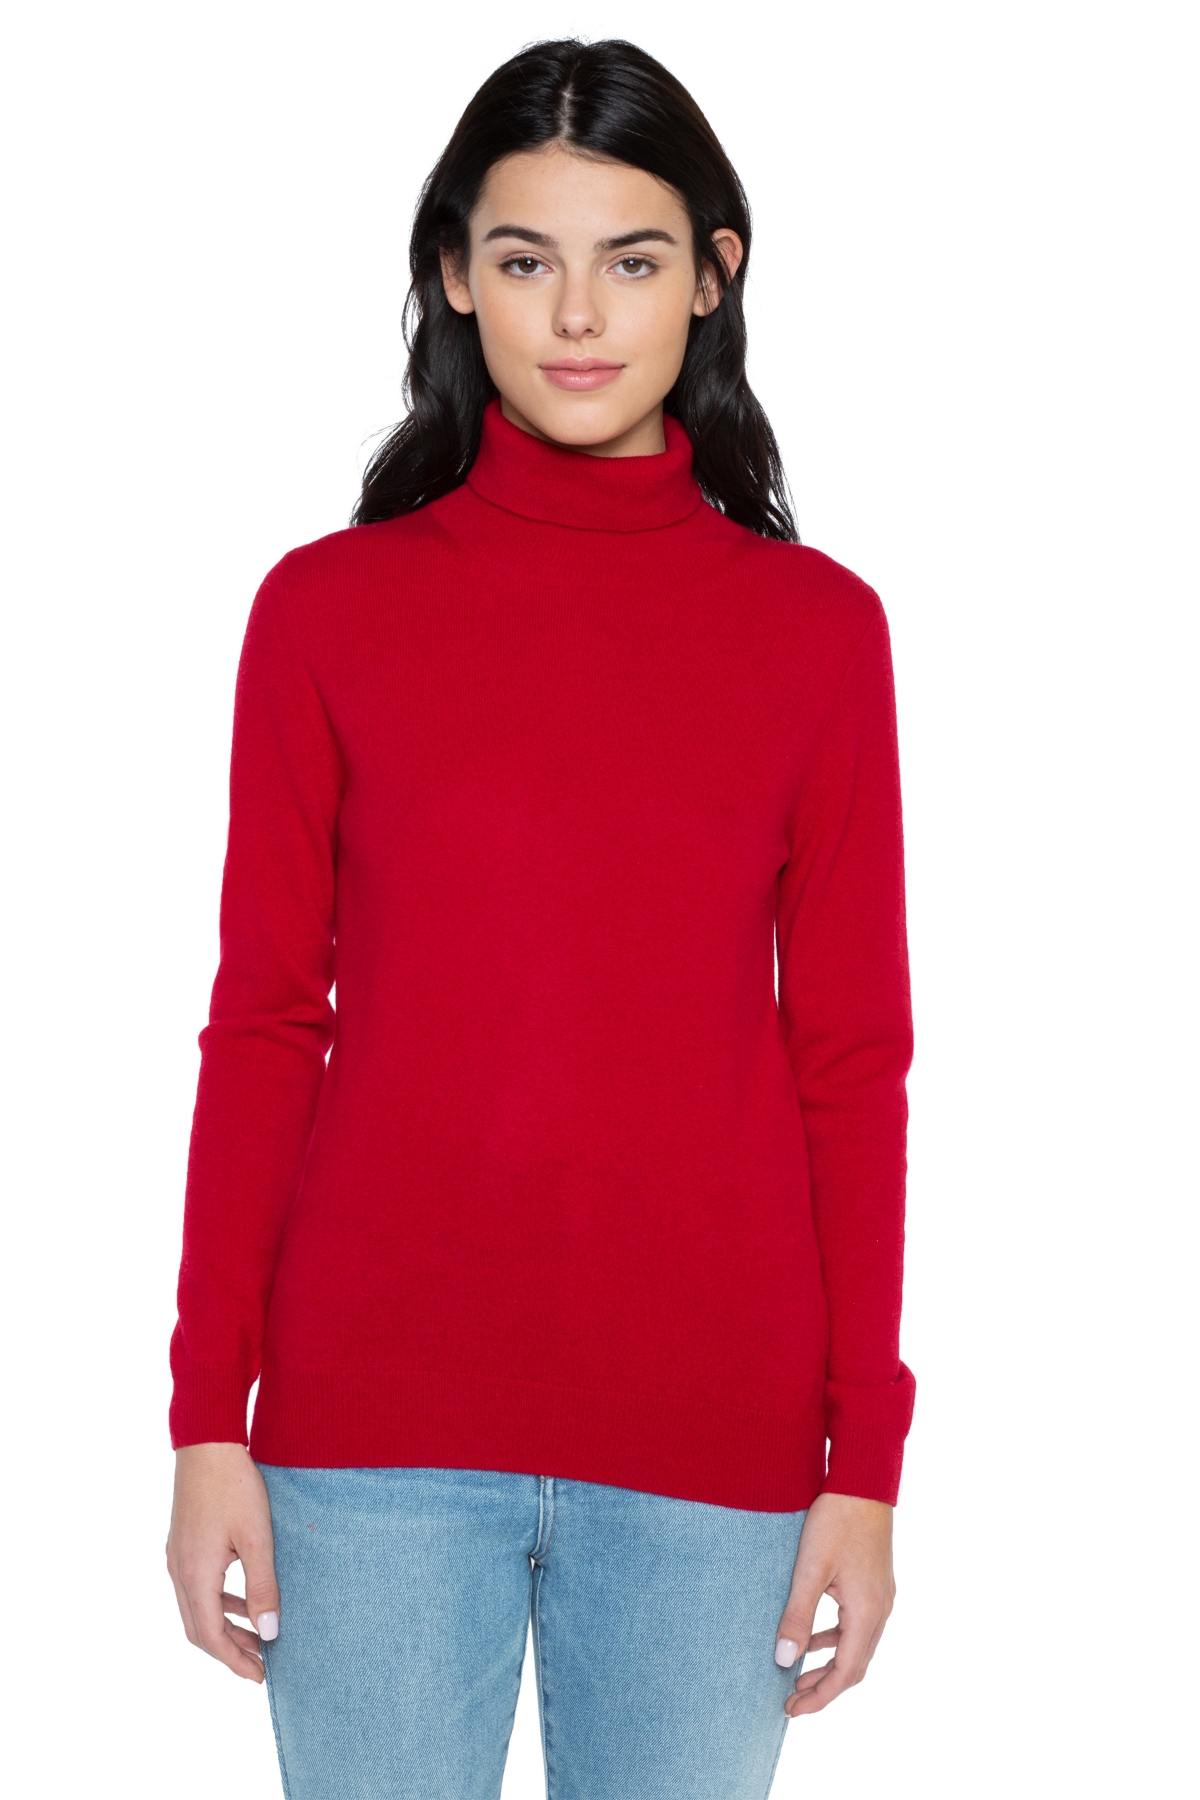 Women's 100% Pure Cashmere Long Sleeve Turtleneck Pullover Sweater - Toffee